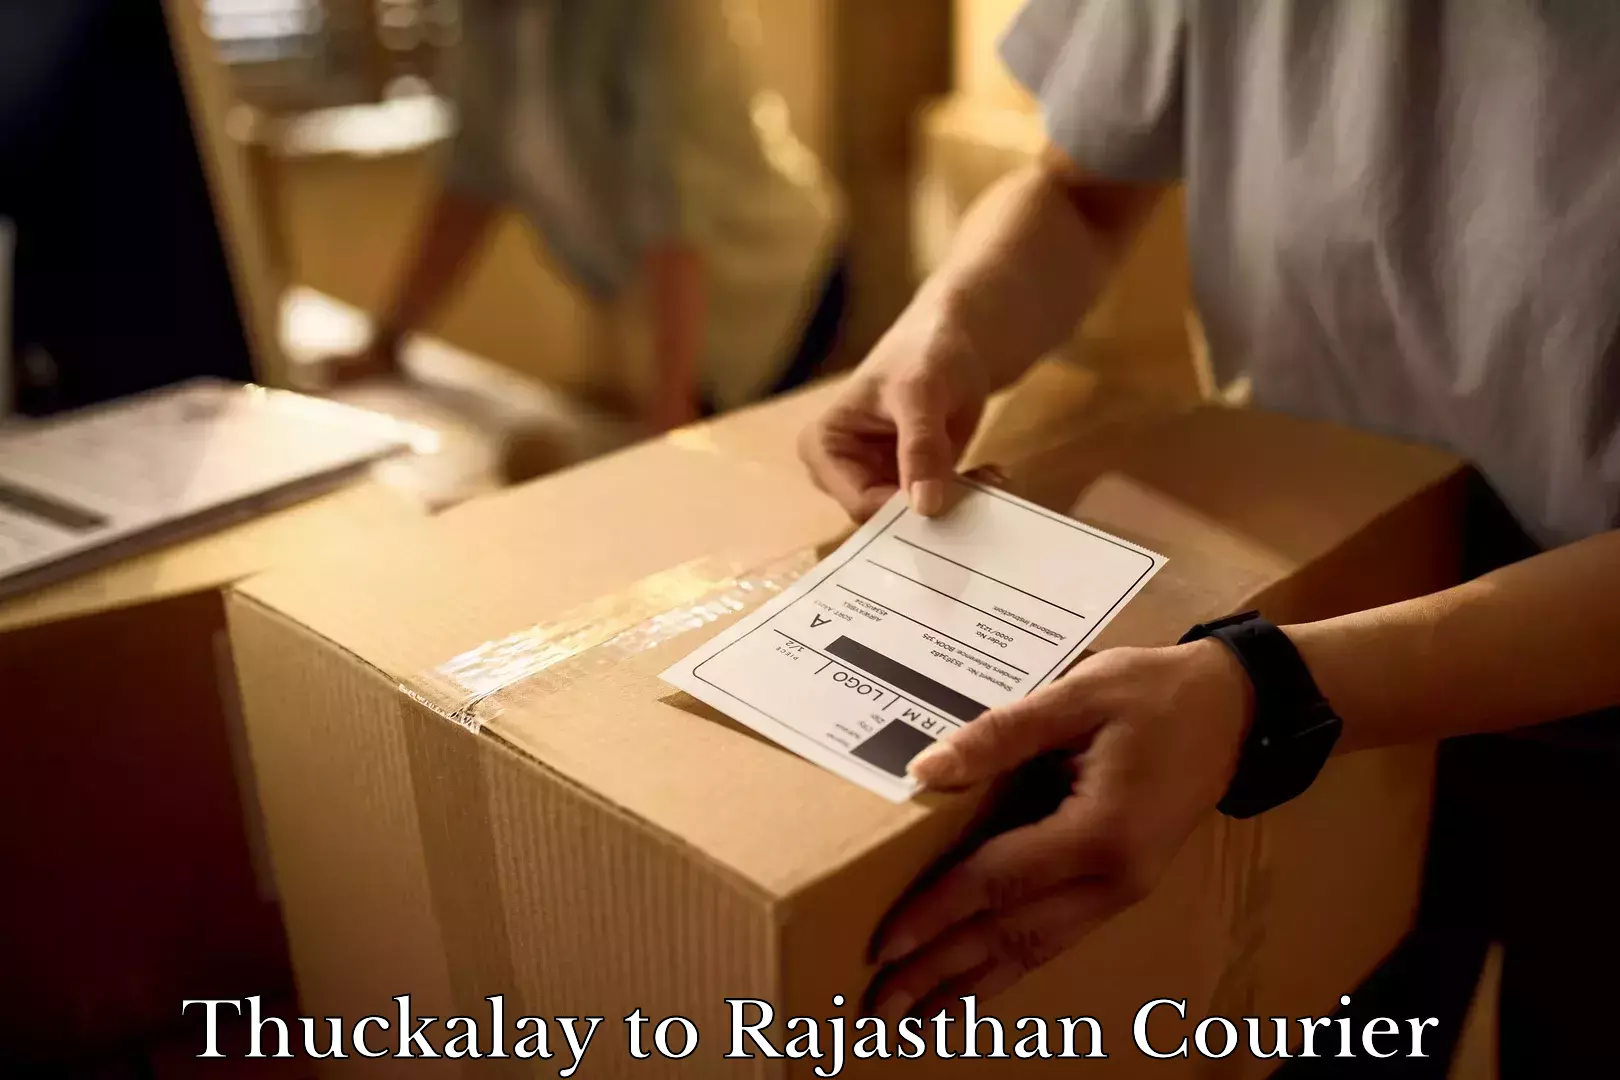 Furniture moving experts Thuckalay to Rajasthan